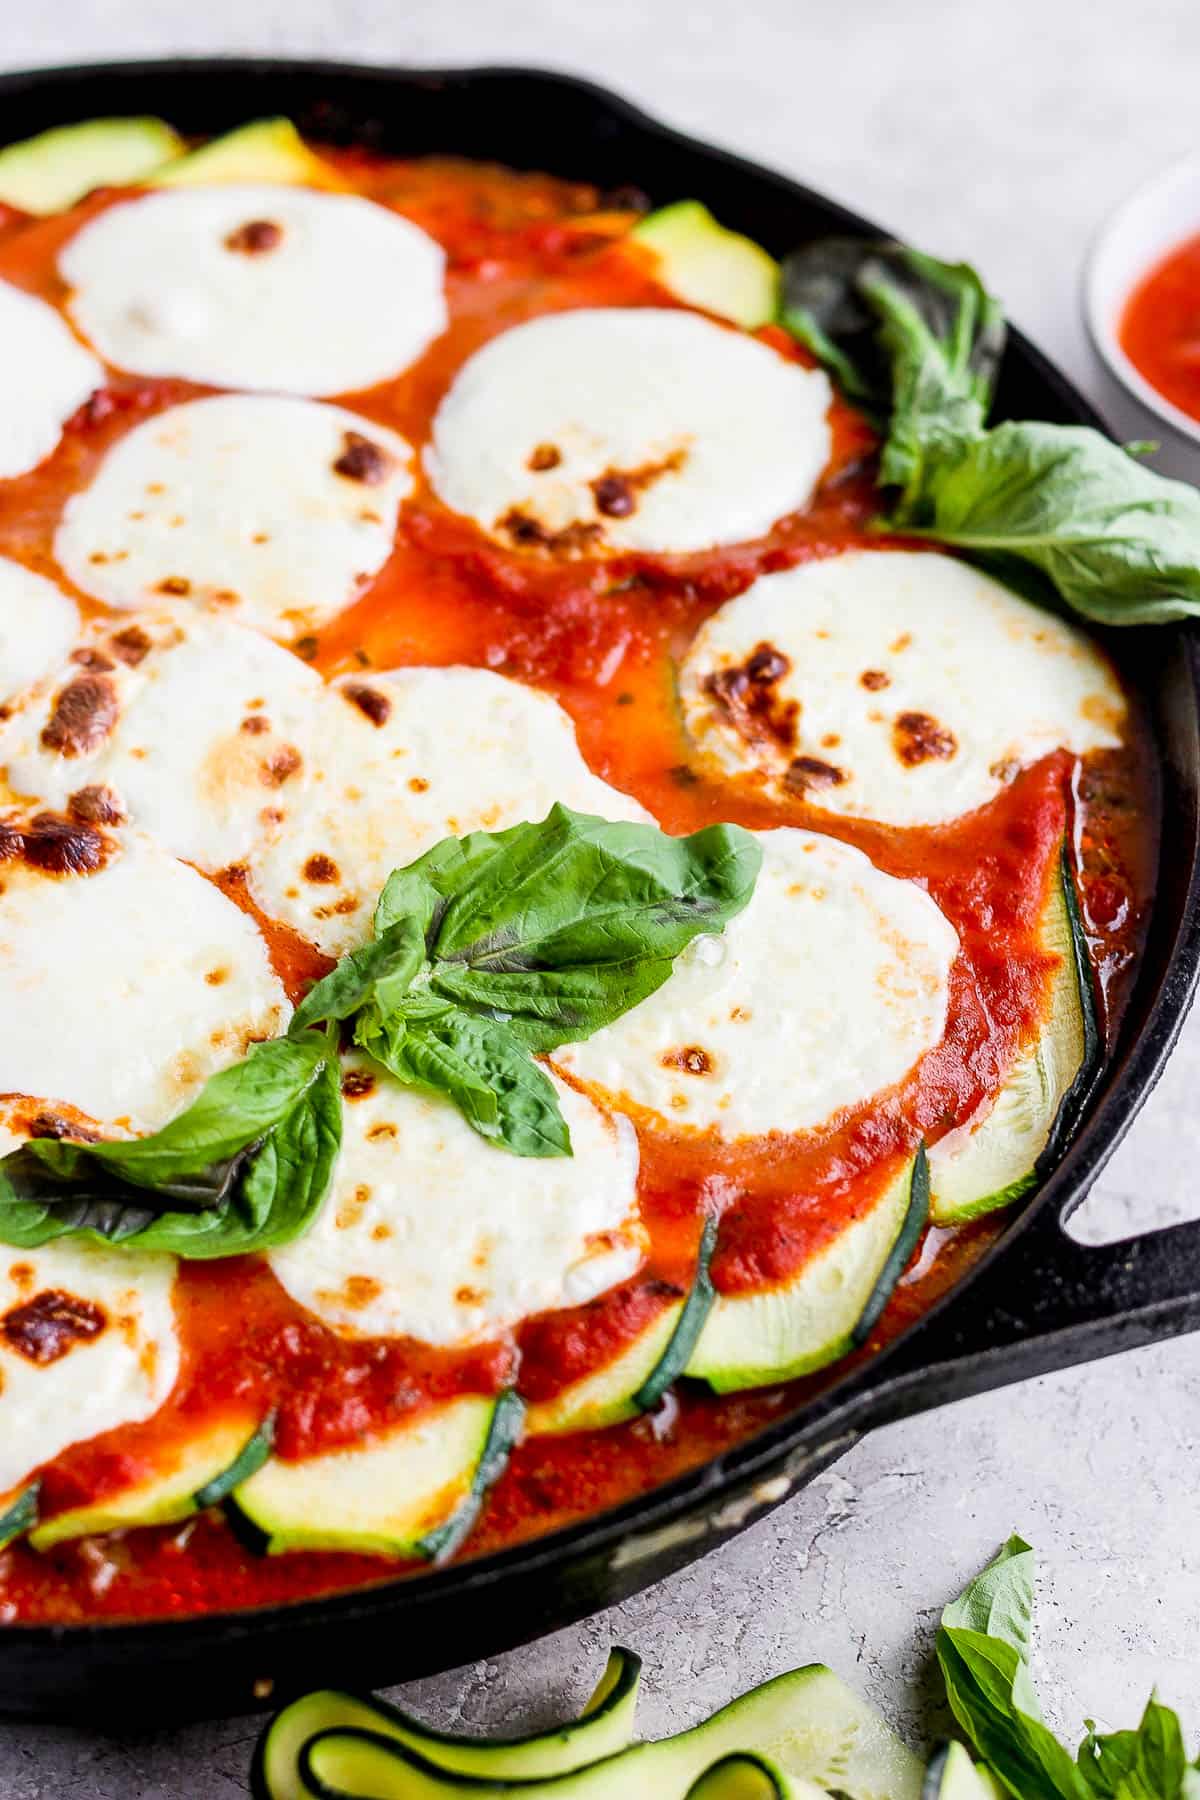 A close up image of the zucchini lasagna showing the melted mozzarella, meat sauce, and layer of zucchinis in the cast iron skillet. 